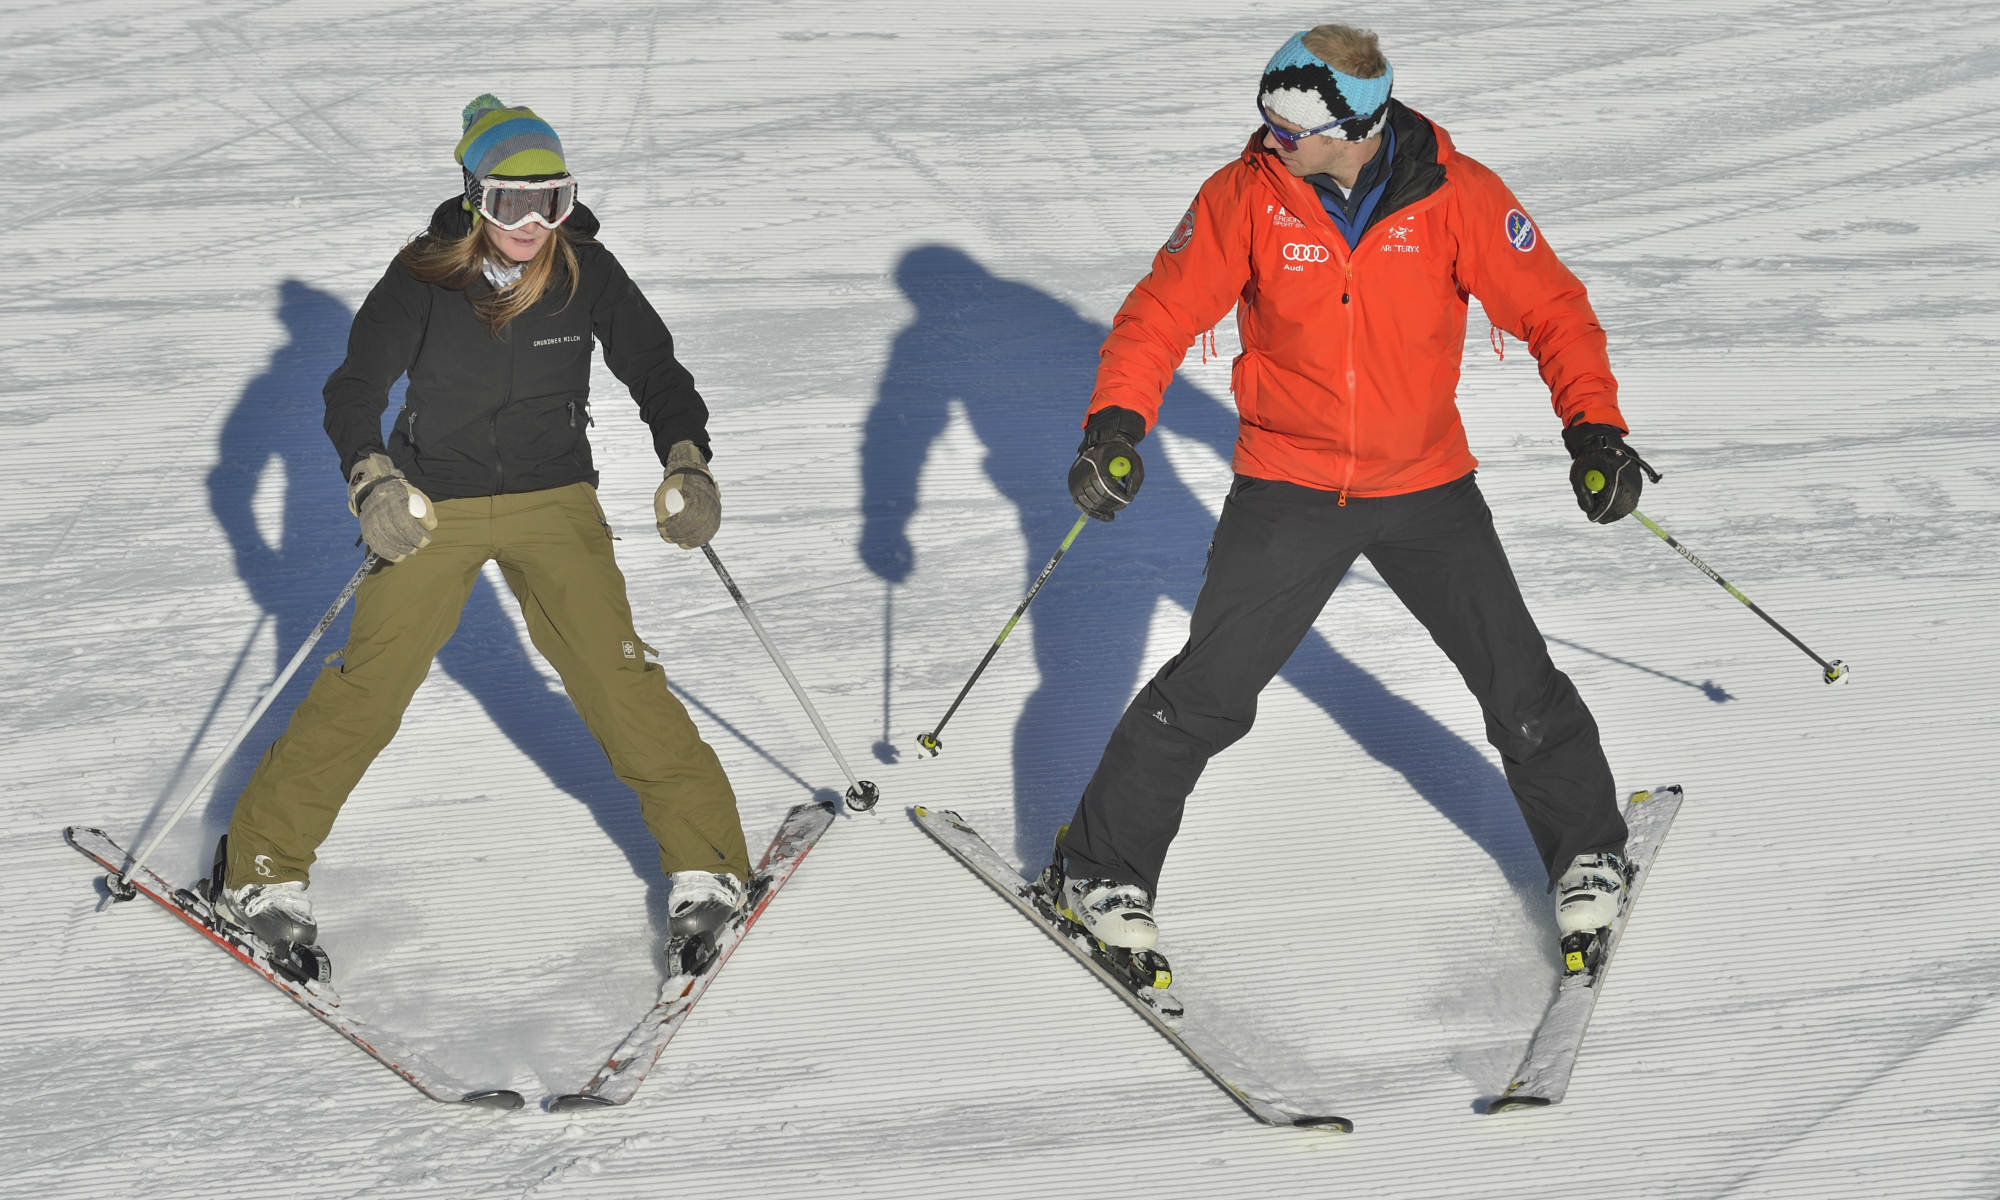 An adult skier during a beginners lesson.